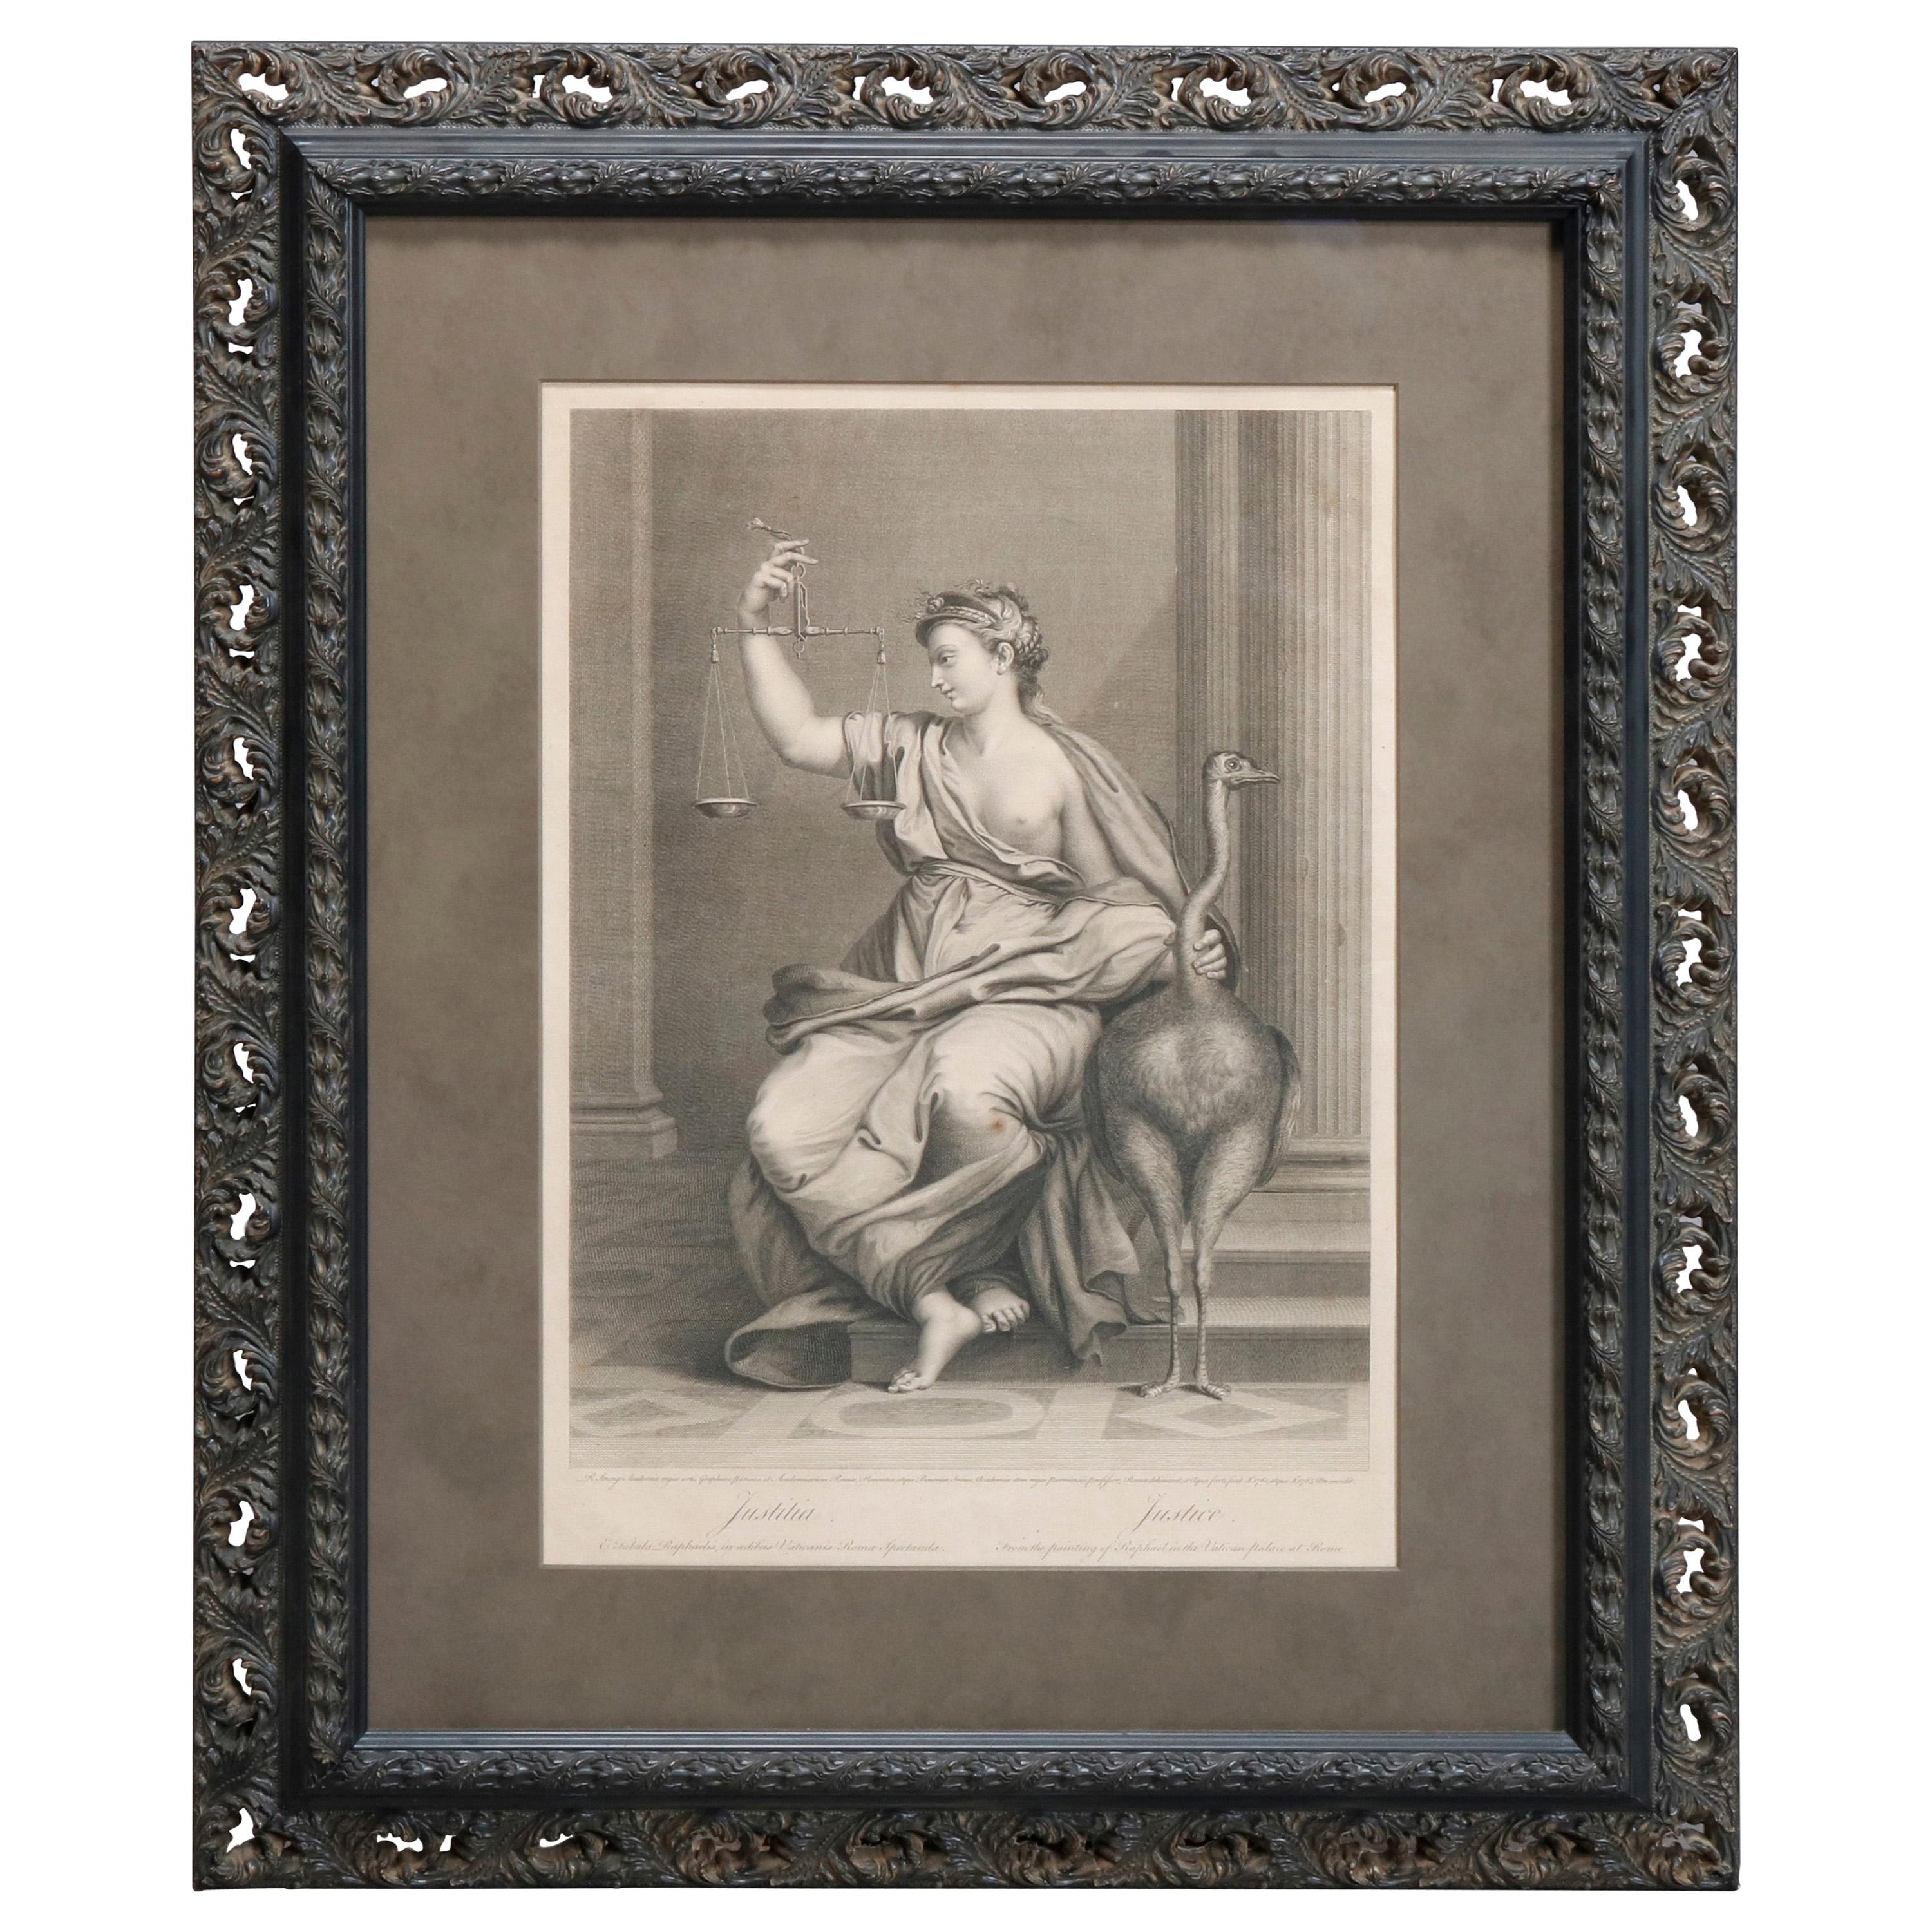 An antique neoclassical lithograph after 